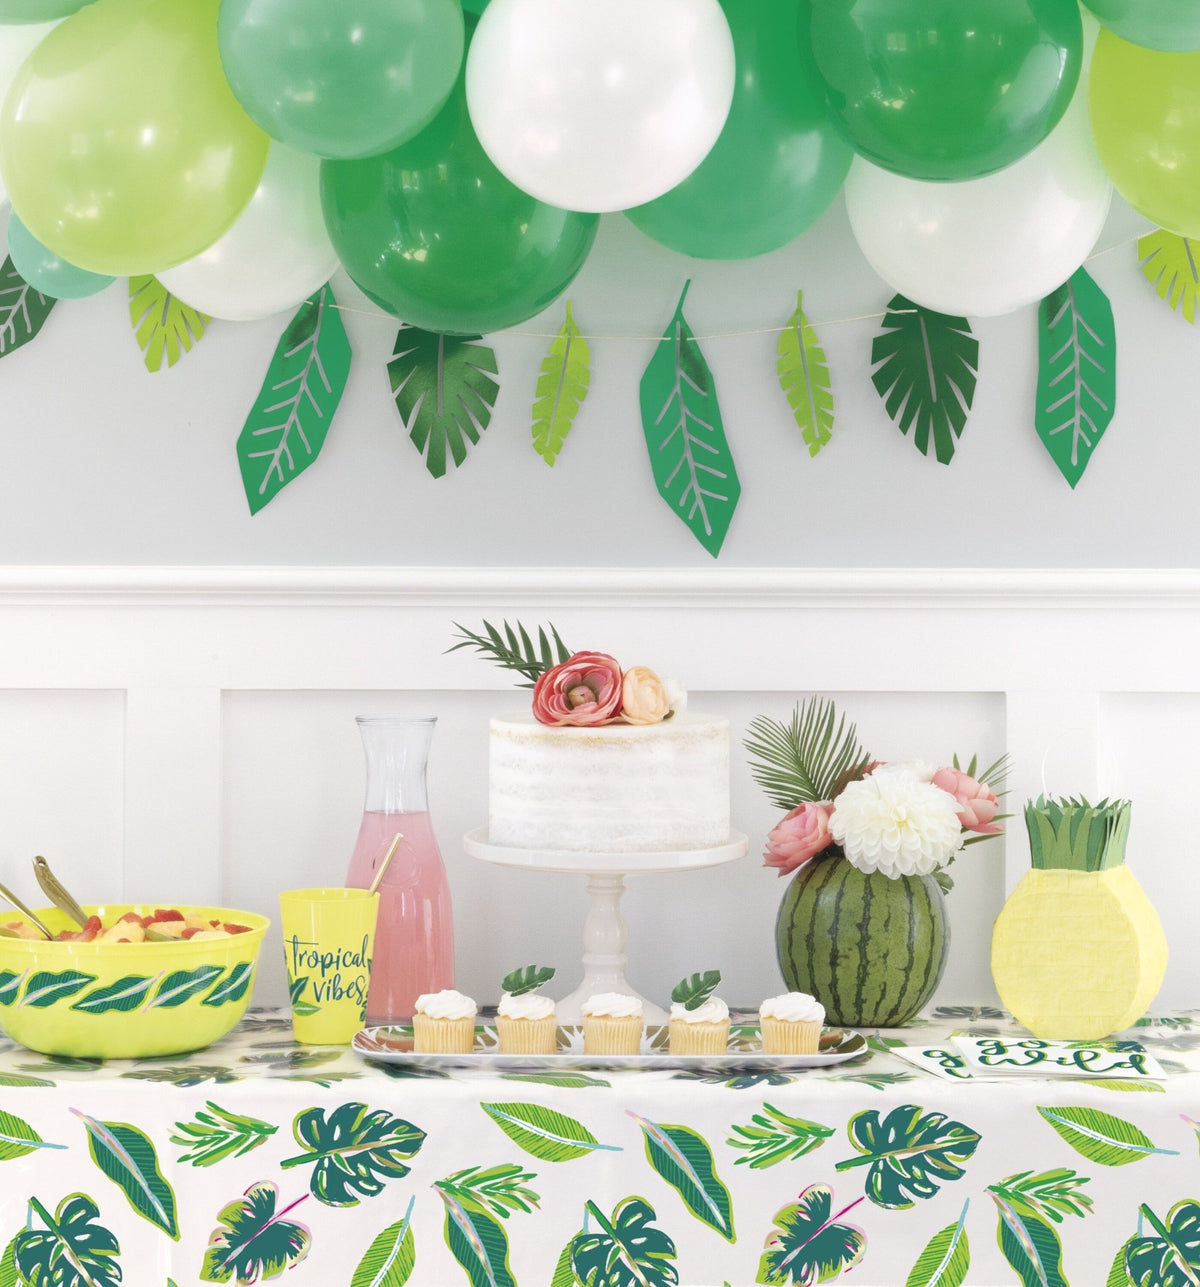 https://cdn.shopify.com/s/files/1/0071/1222/8927/products/tropical-leaf-party-tablecloth-902278_1200x.jpg?v=1691027867